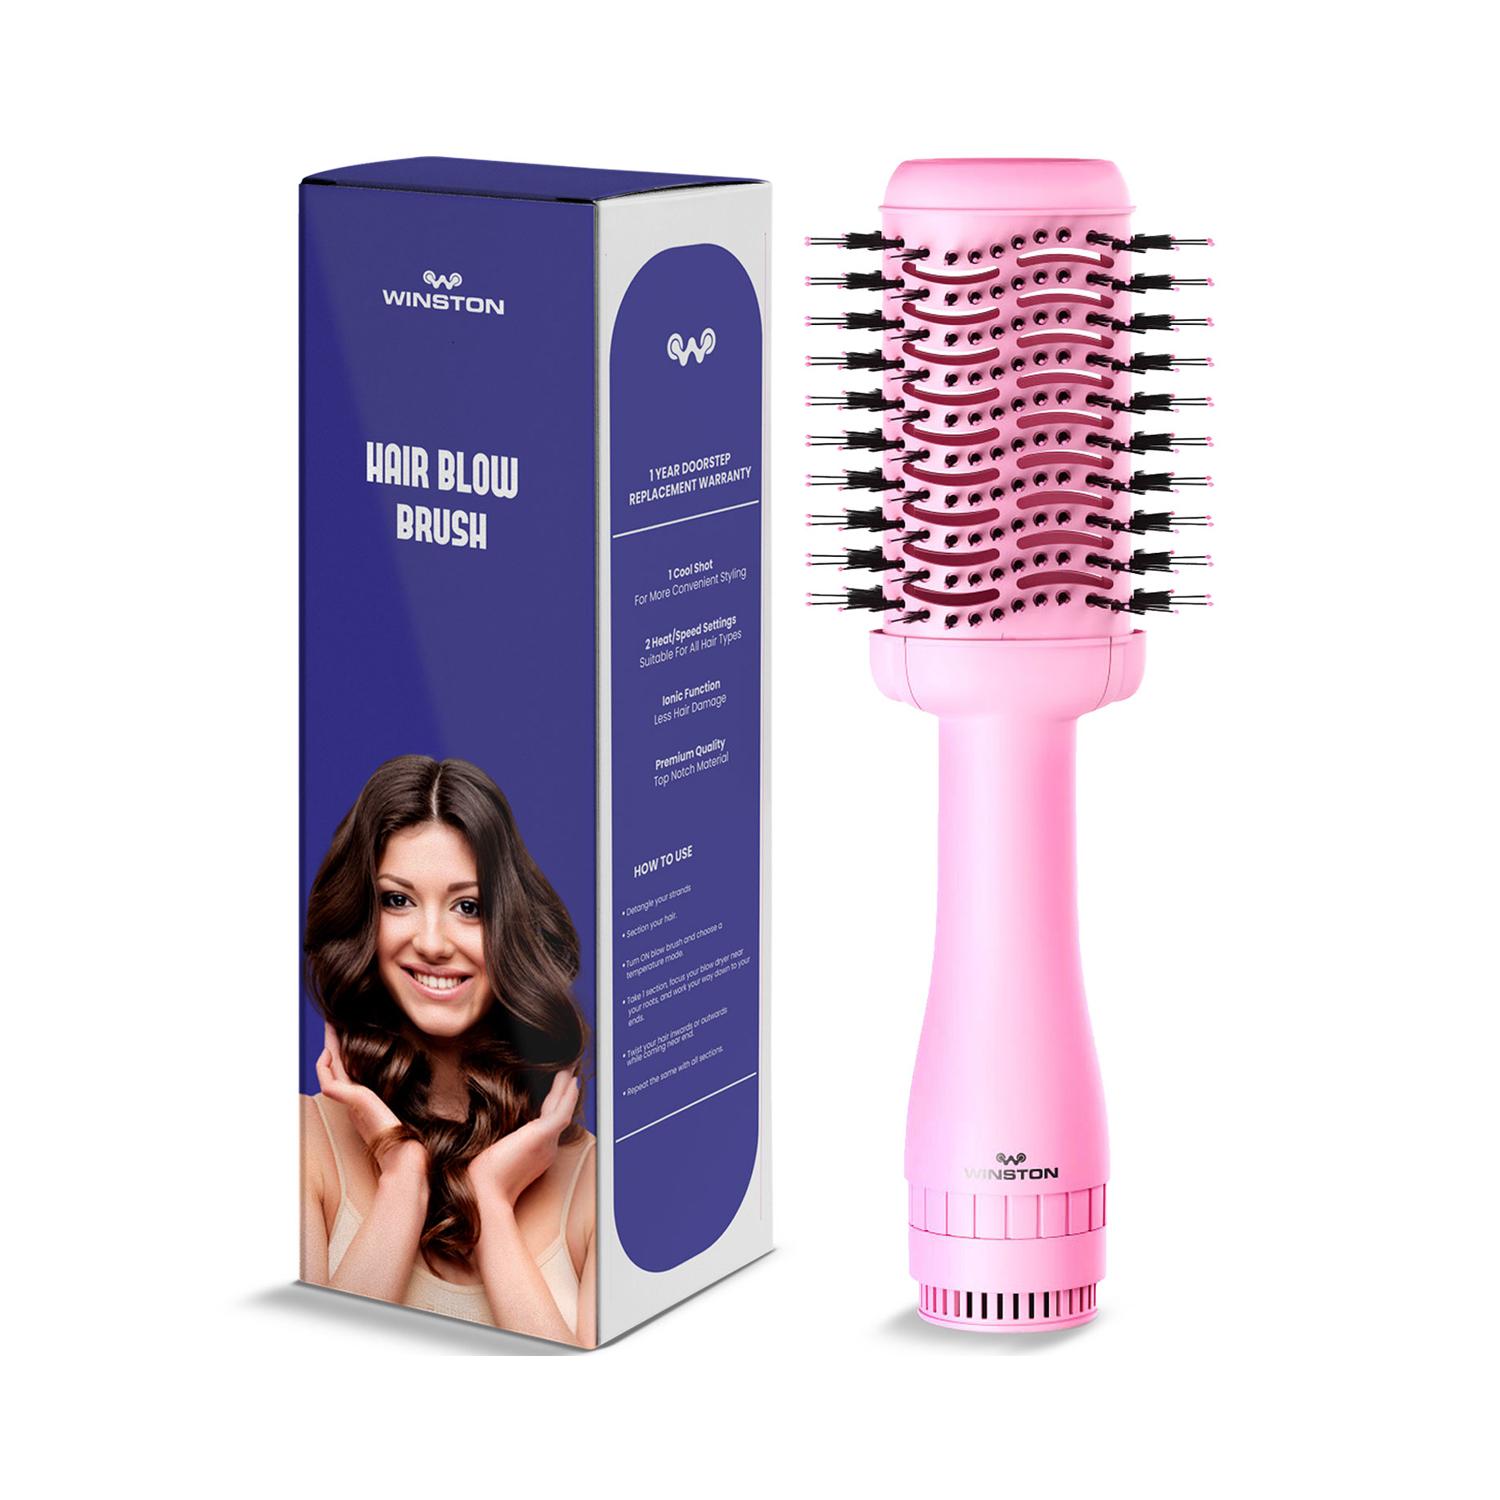 WINSTON | WINSTON Blow Drying Brush With Adjustable Temperature Setting 1200W - Pink (1Pc)